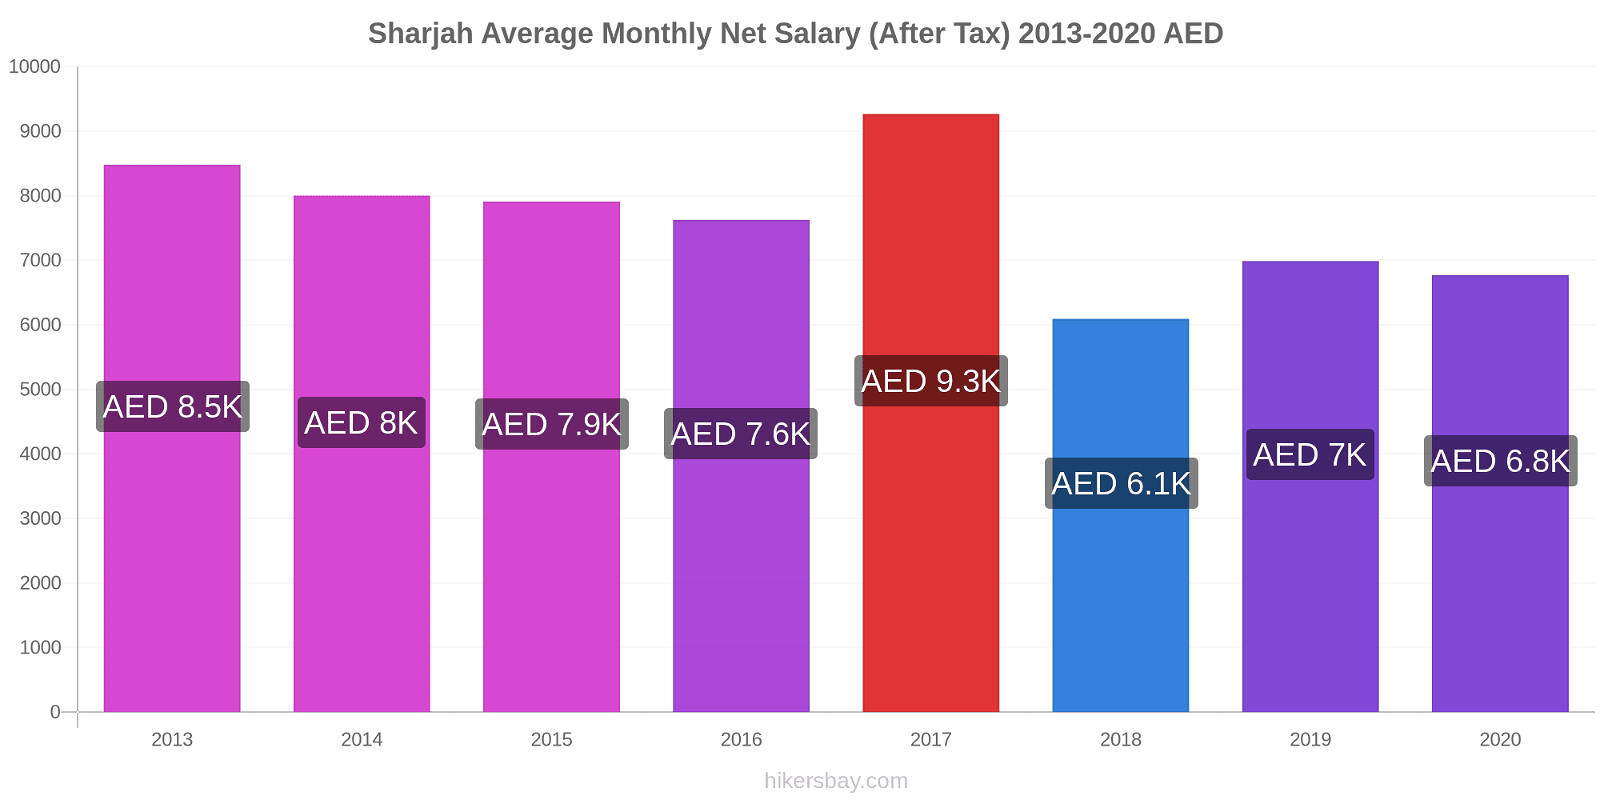 Sharjah price changes Average Monthly Net Salary (After Tax) hikersbay.com